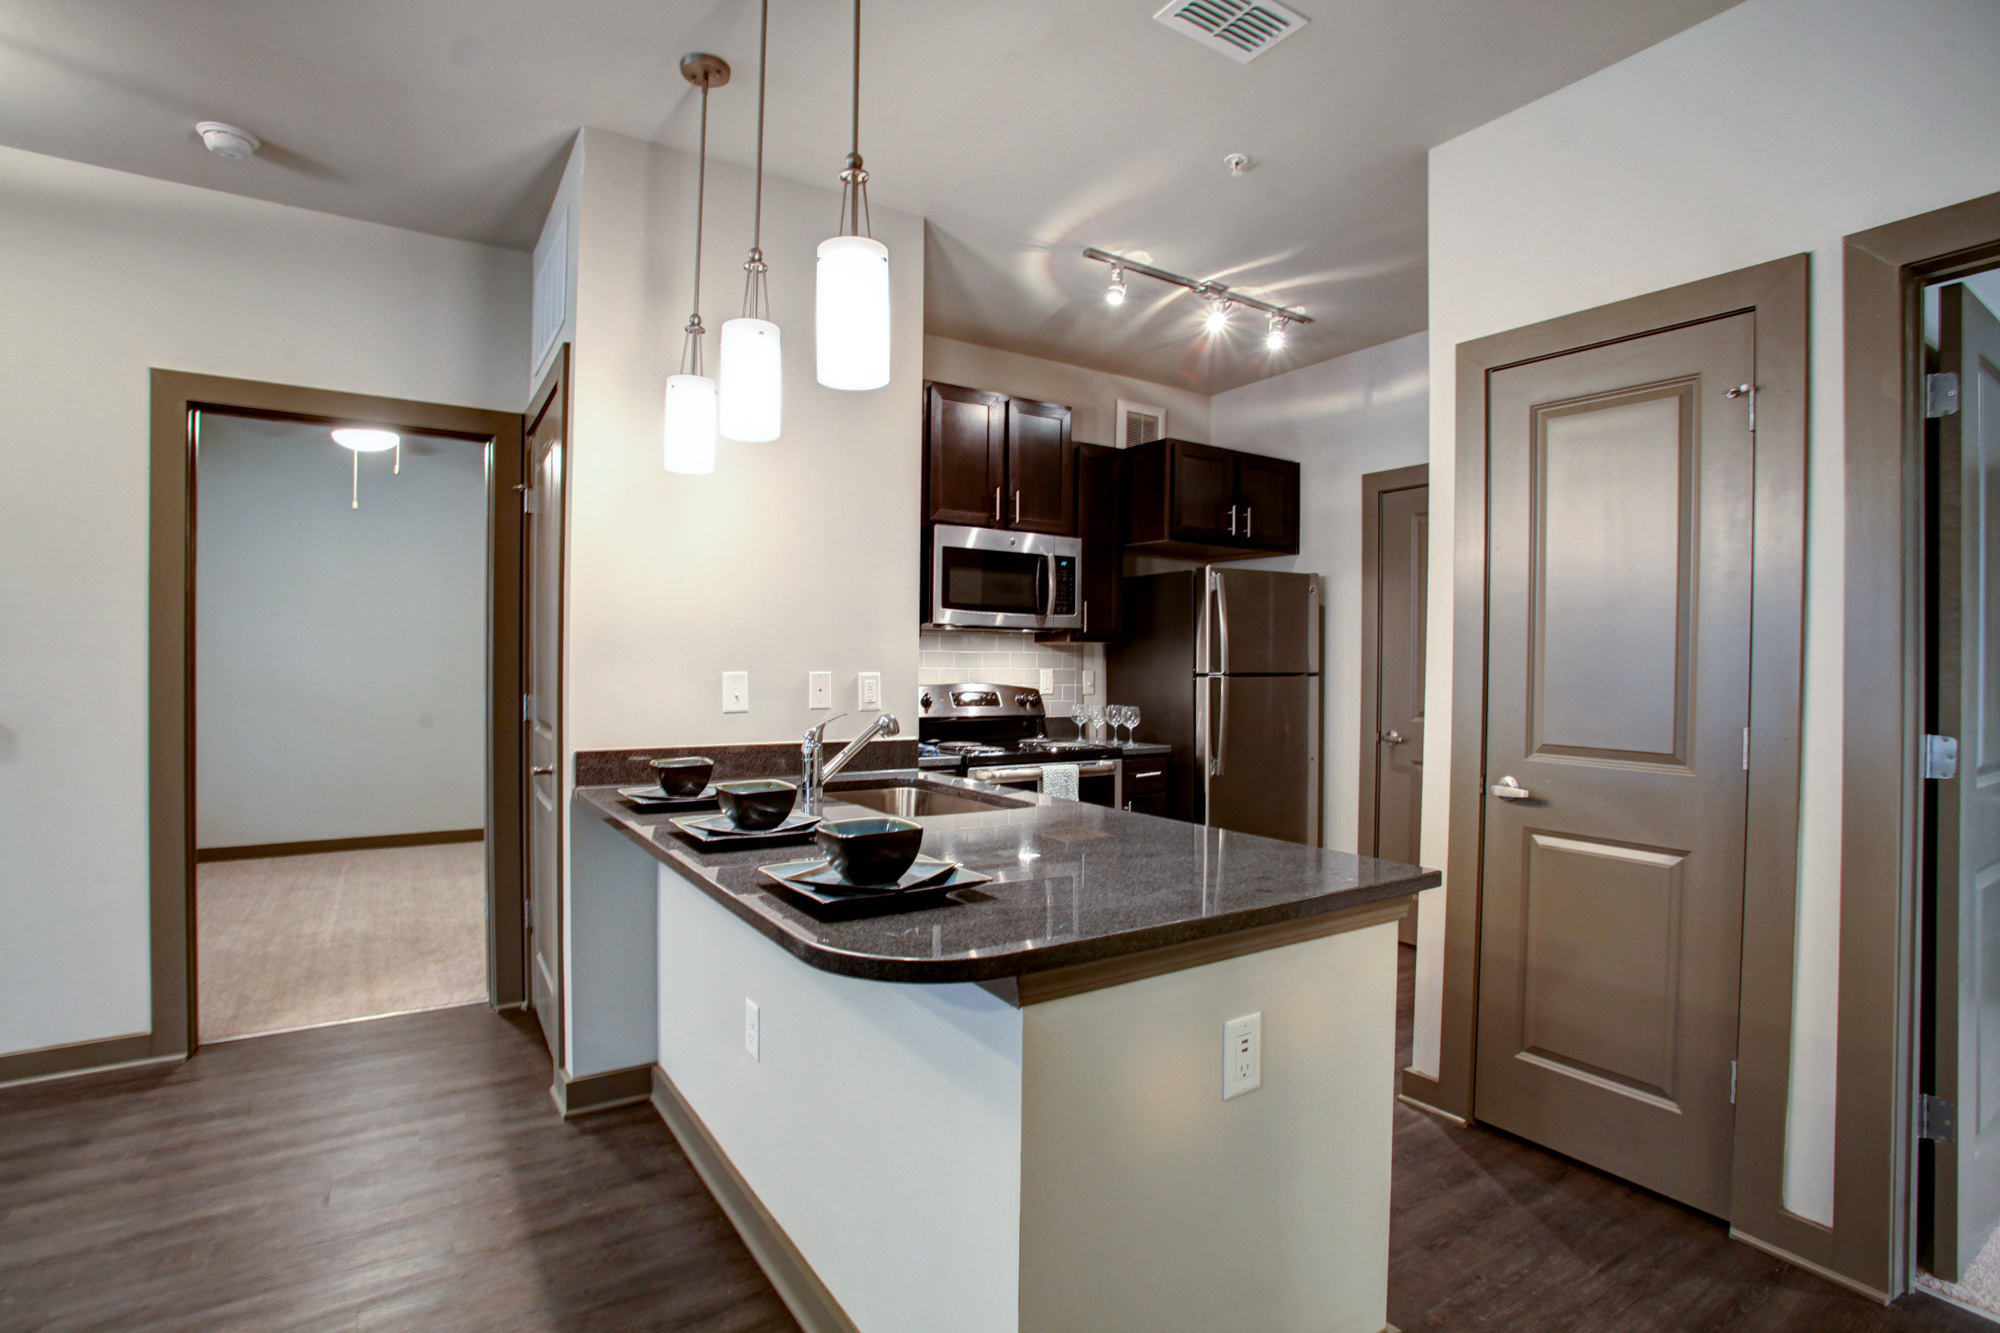 A kitchen island with stainless steel appliances and an open door on the left at Park 9 apartments.